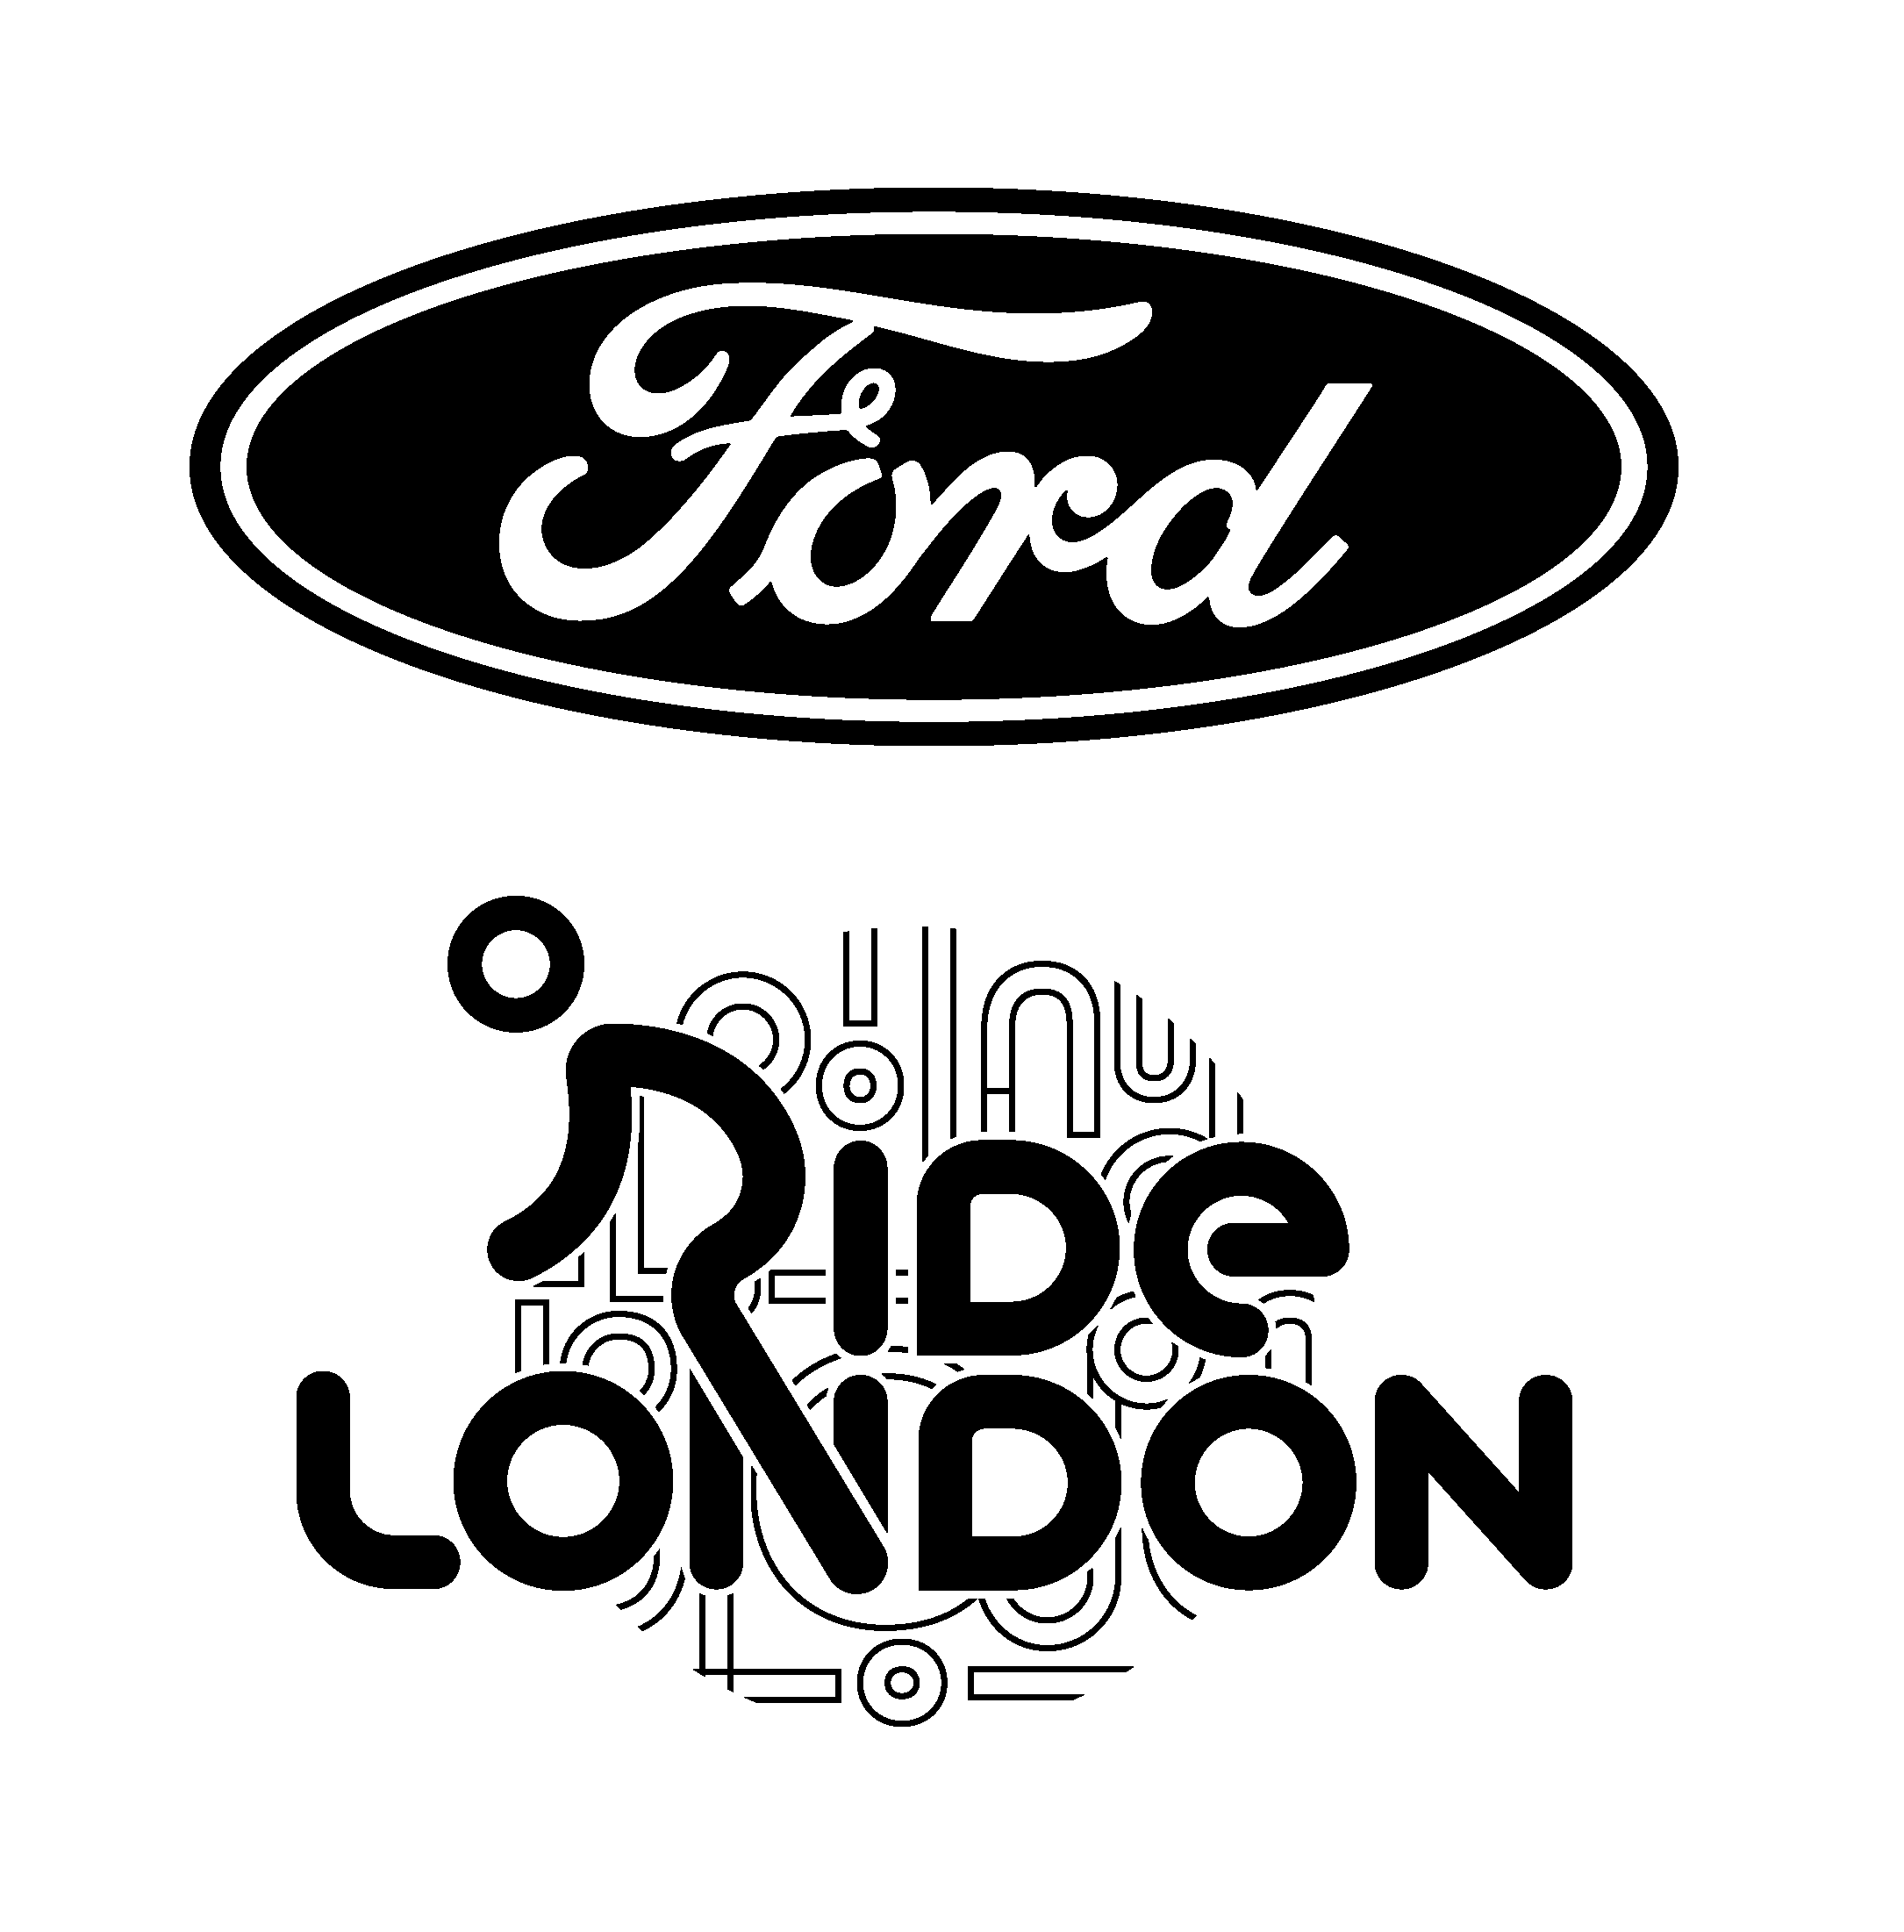 bicycle insurance Ford Ride London logo